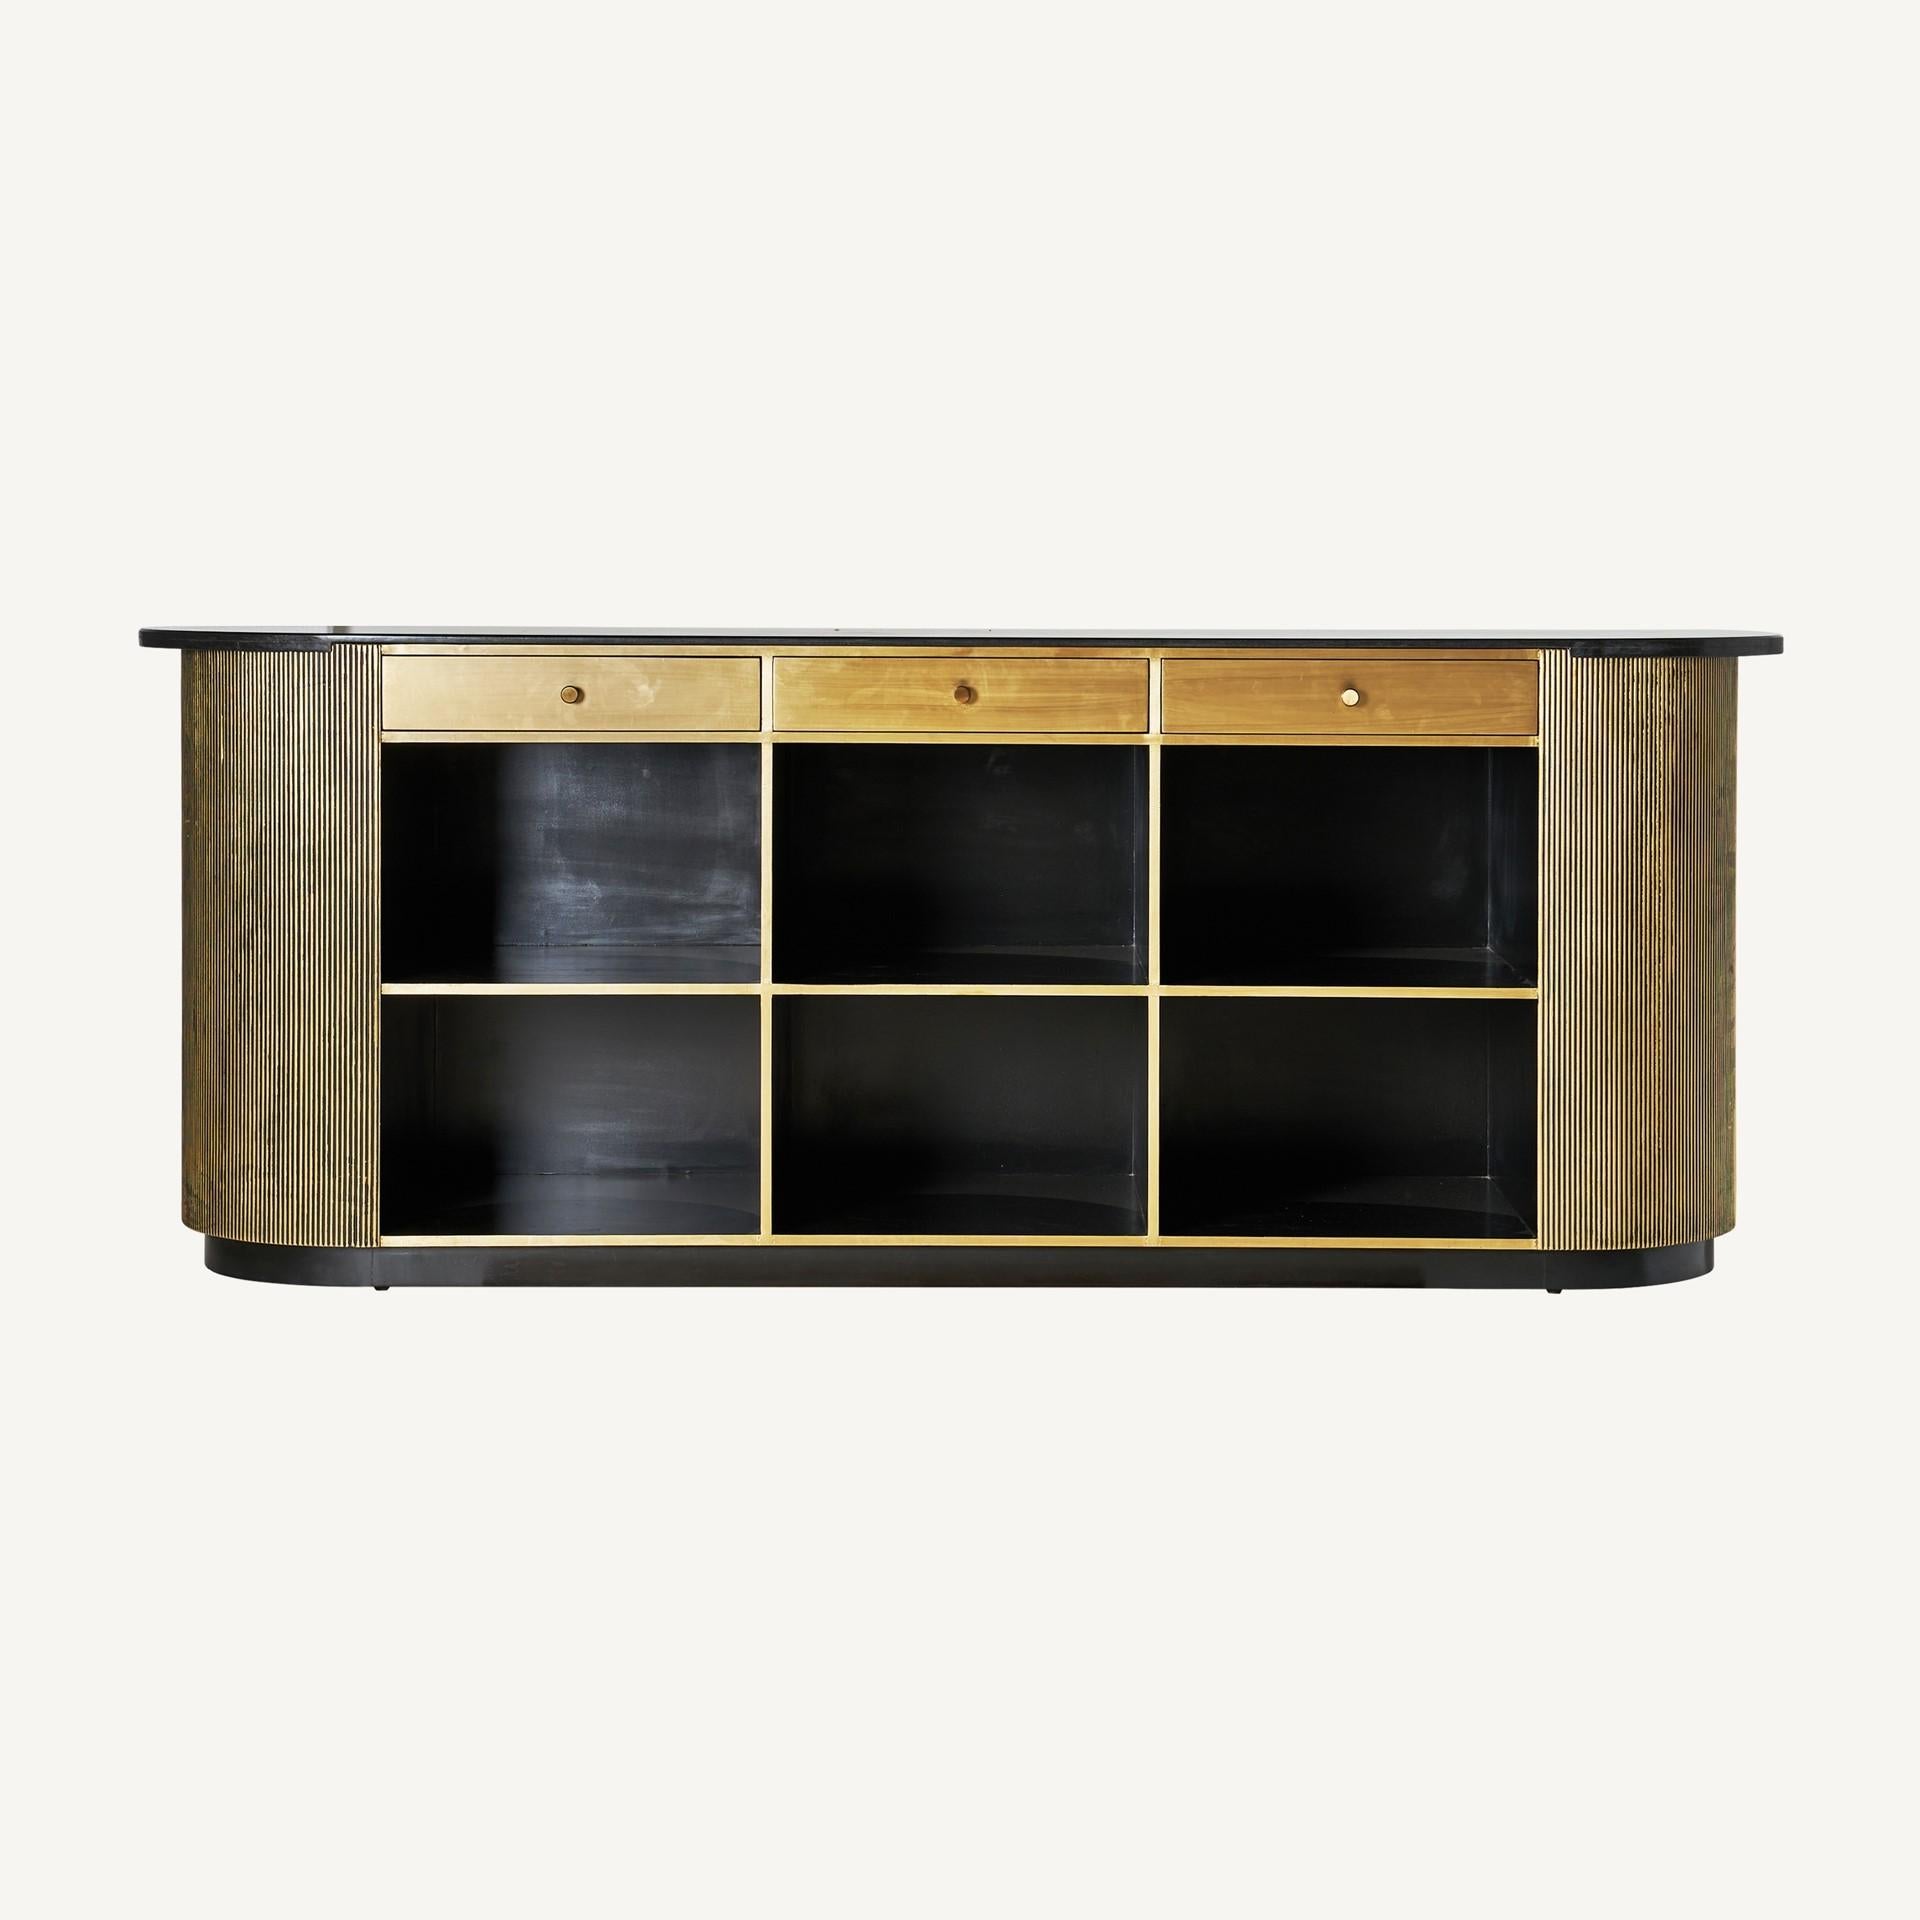 Oval and black bevelled stone tray, curved and rounded lines bar or counter table sparkling and sophisticated with black lacquered wooden structure with brass finishes, opening shelves spaces on the other side. Just amazing!